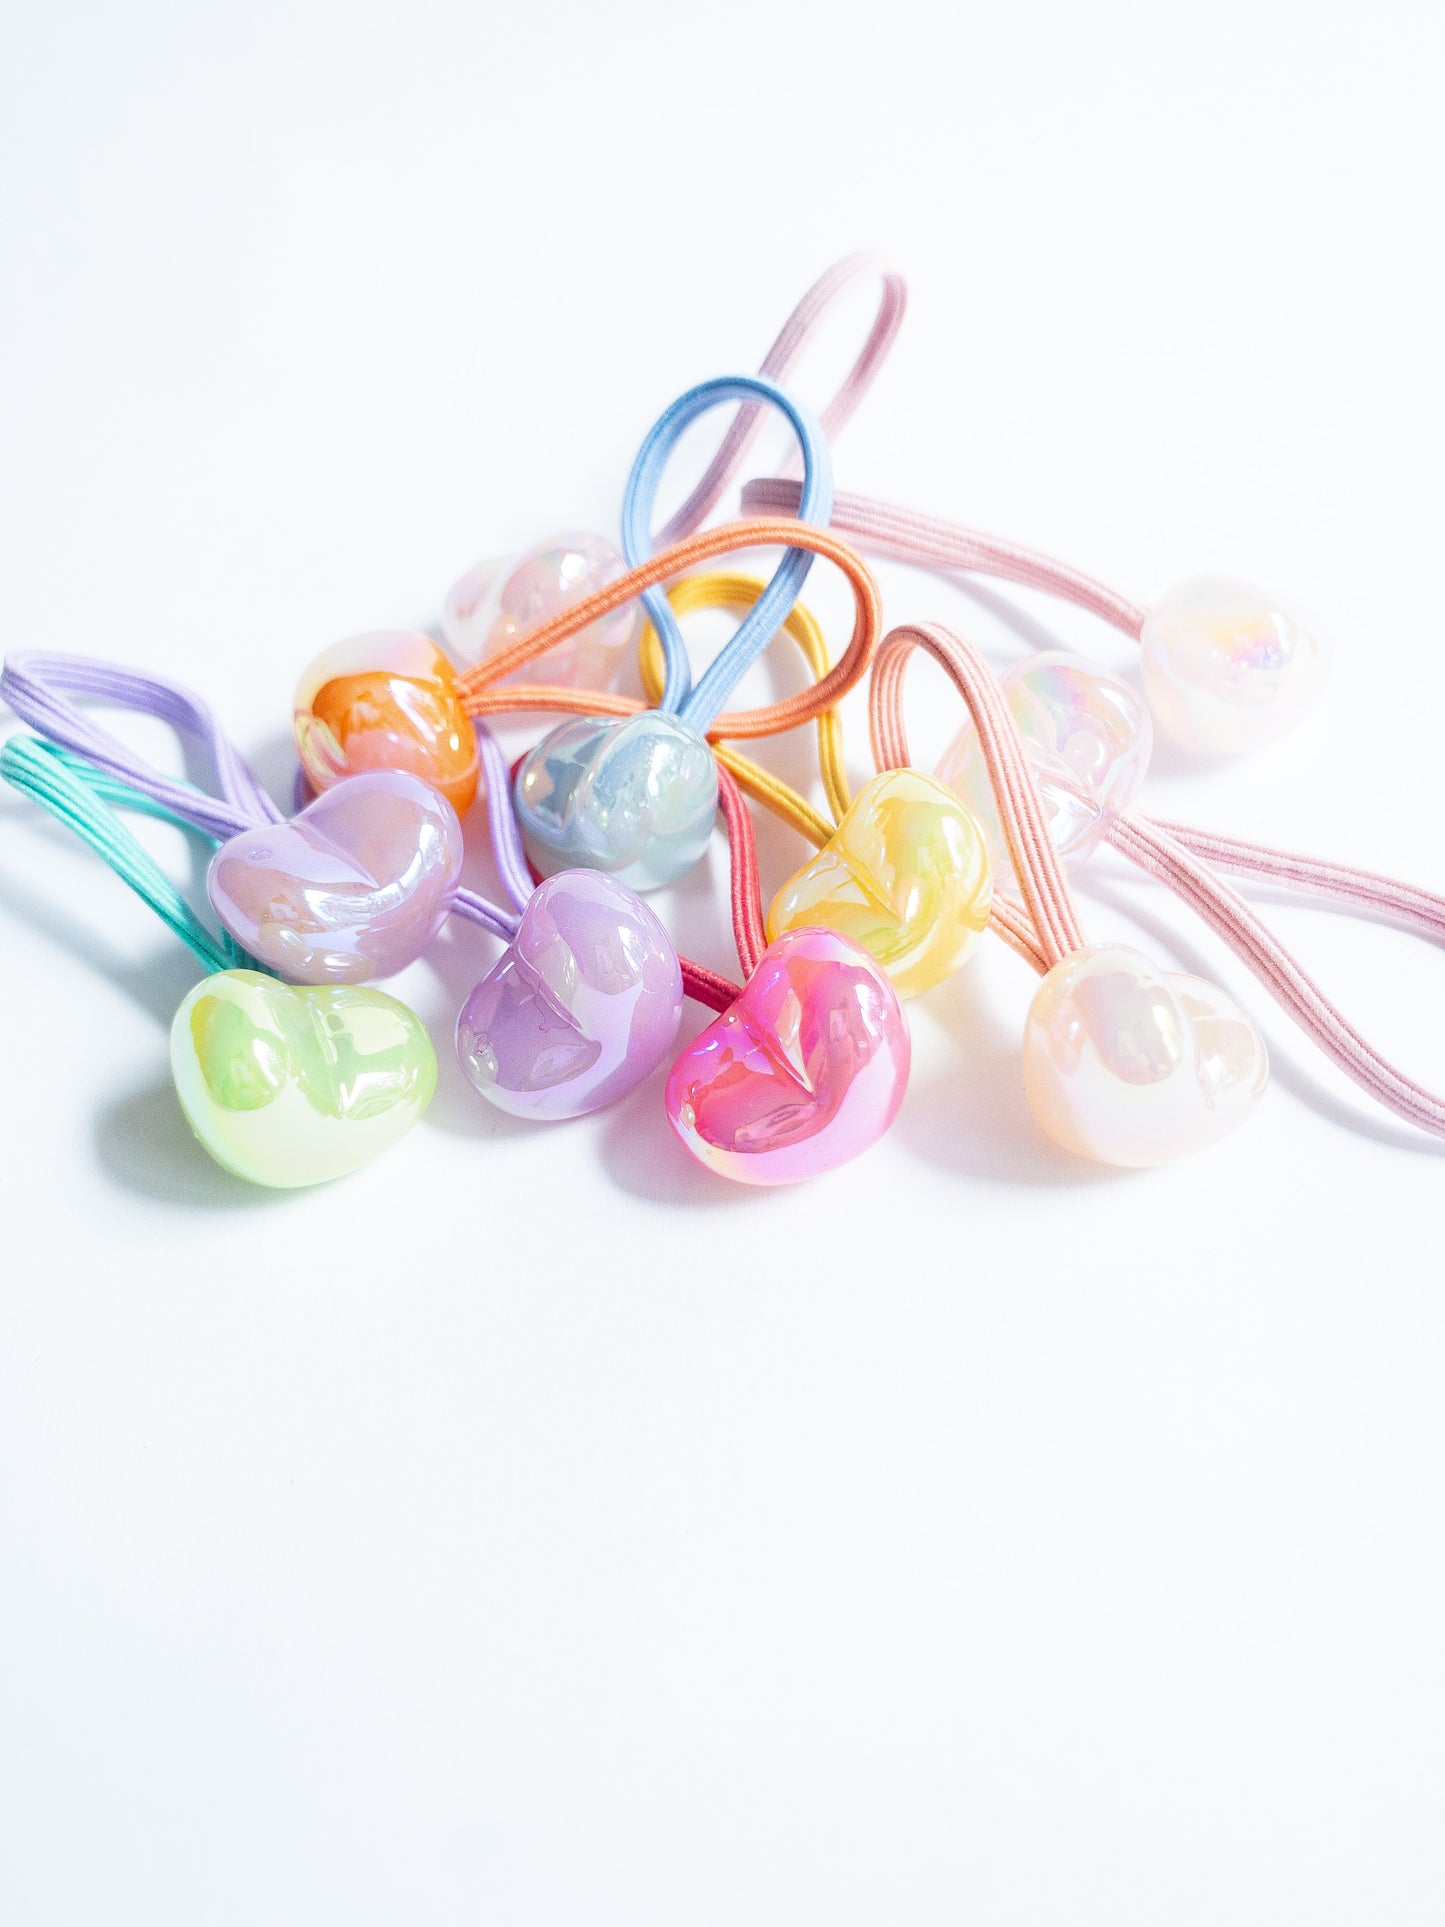 Dreamy, iridescent bubble heart hair ties! These pearly hair ties glisten and gleam in candy taffy colors. They're strong enough to hold hairstyles and cute enough to wear them all at once. Each set contains 10 hair ties.